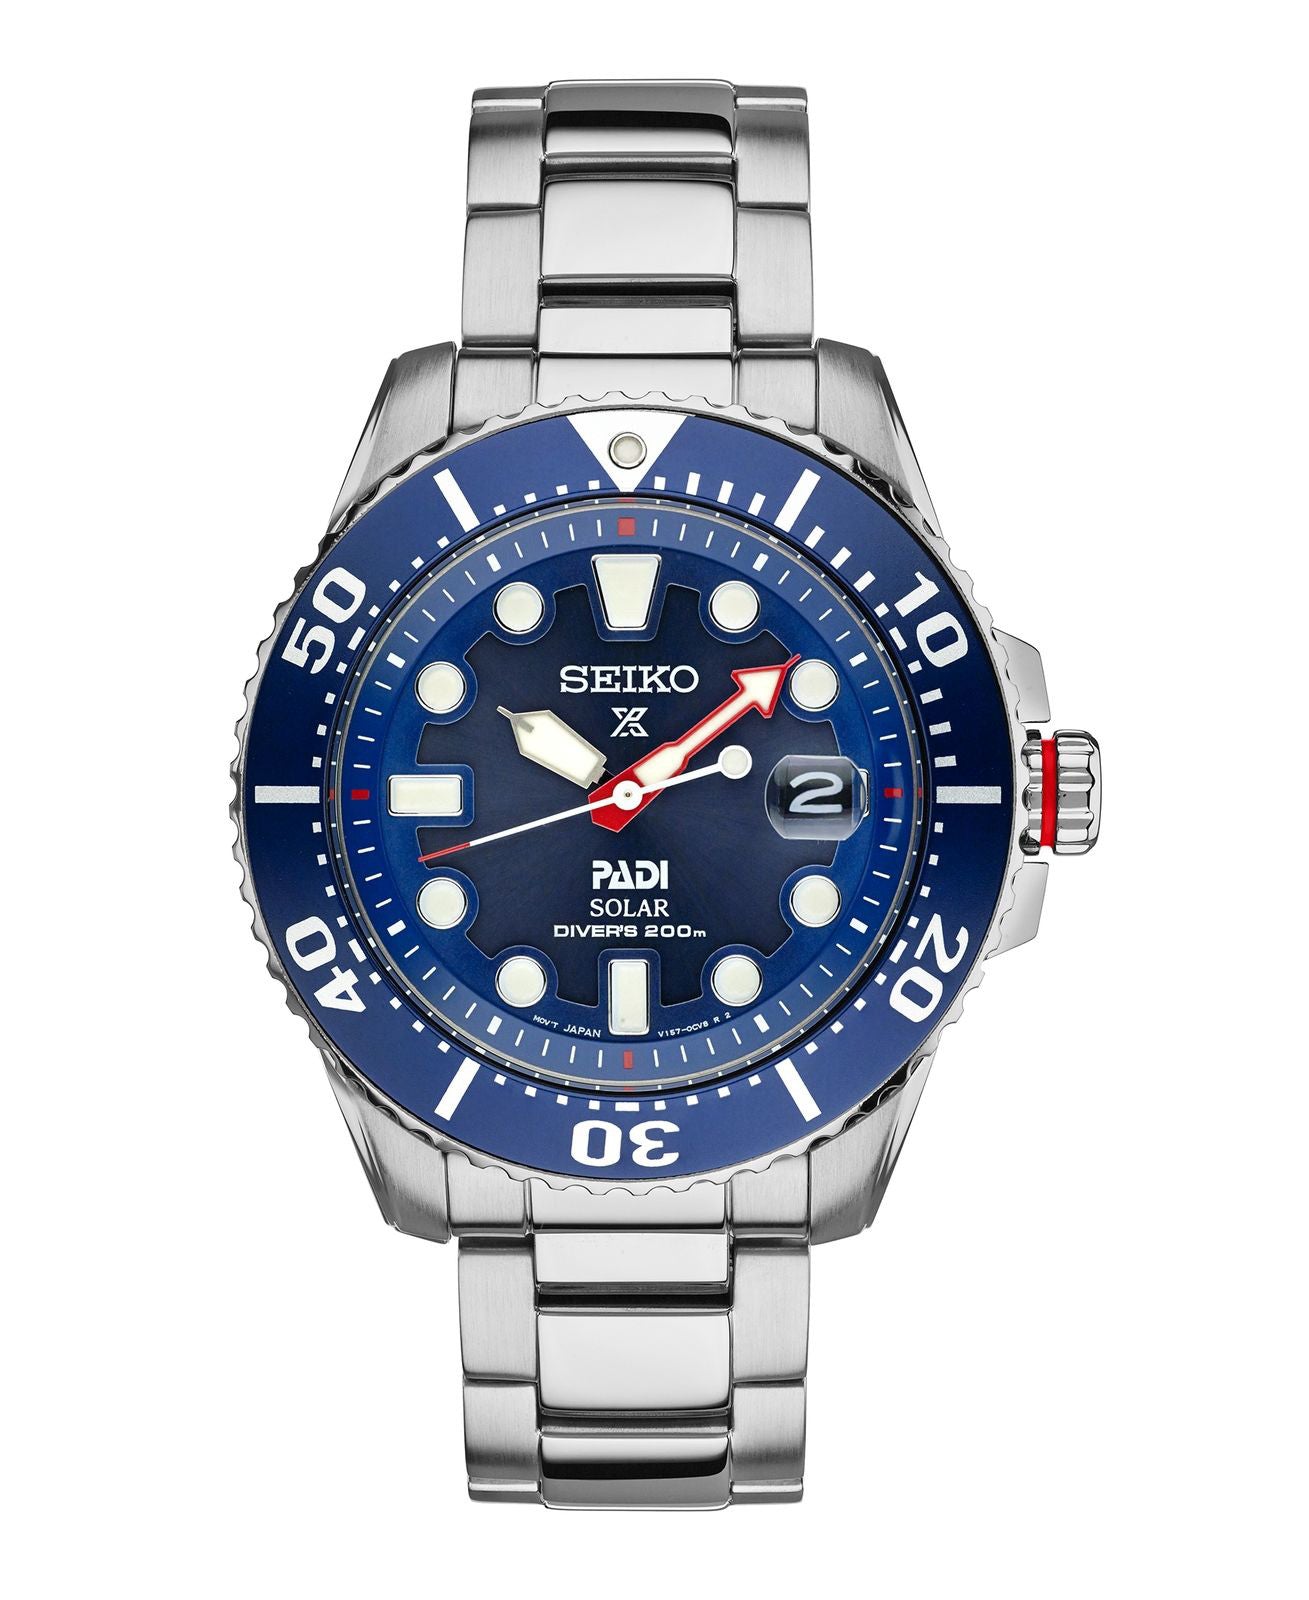 New Seiko PADI Dive Watch SNE435 Harnesses the Power of the SUN